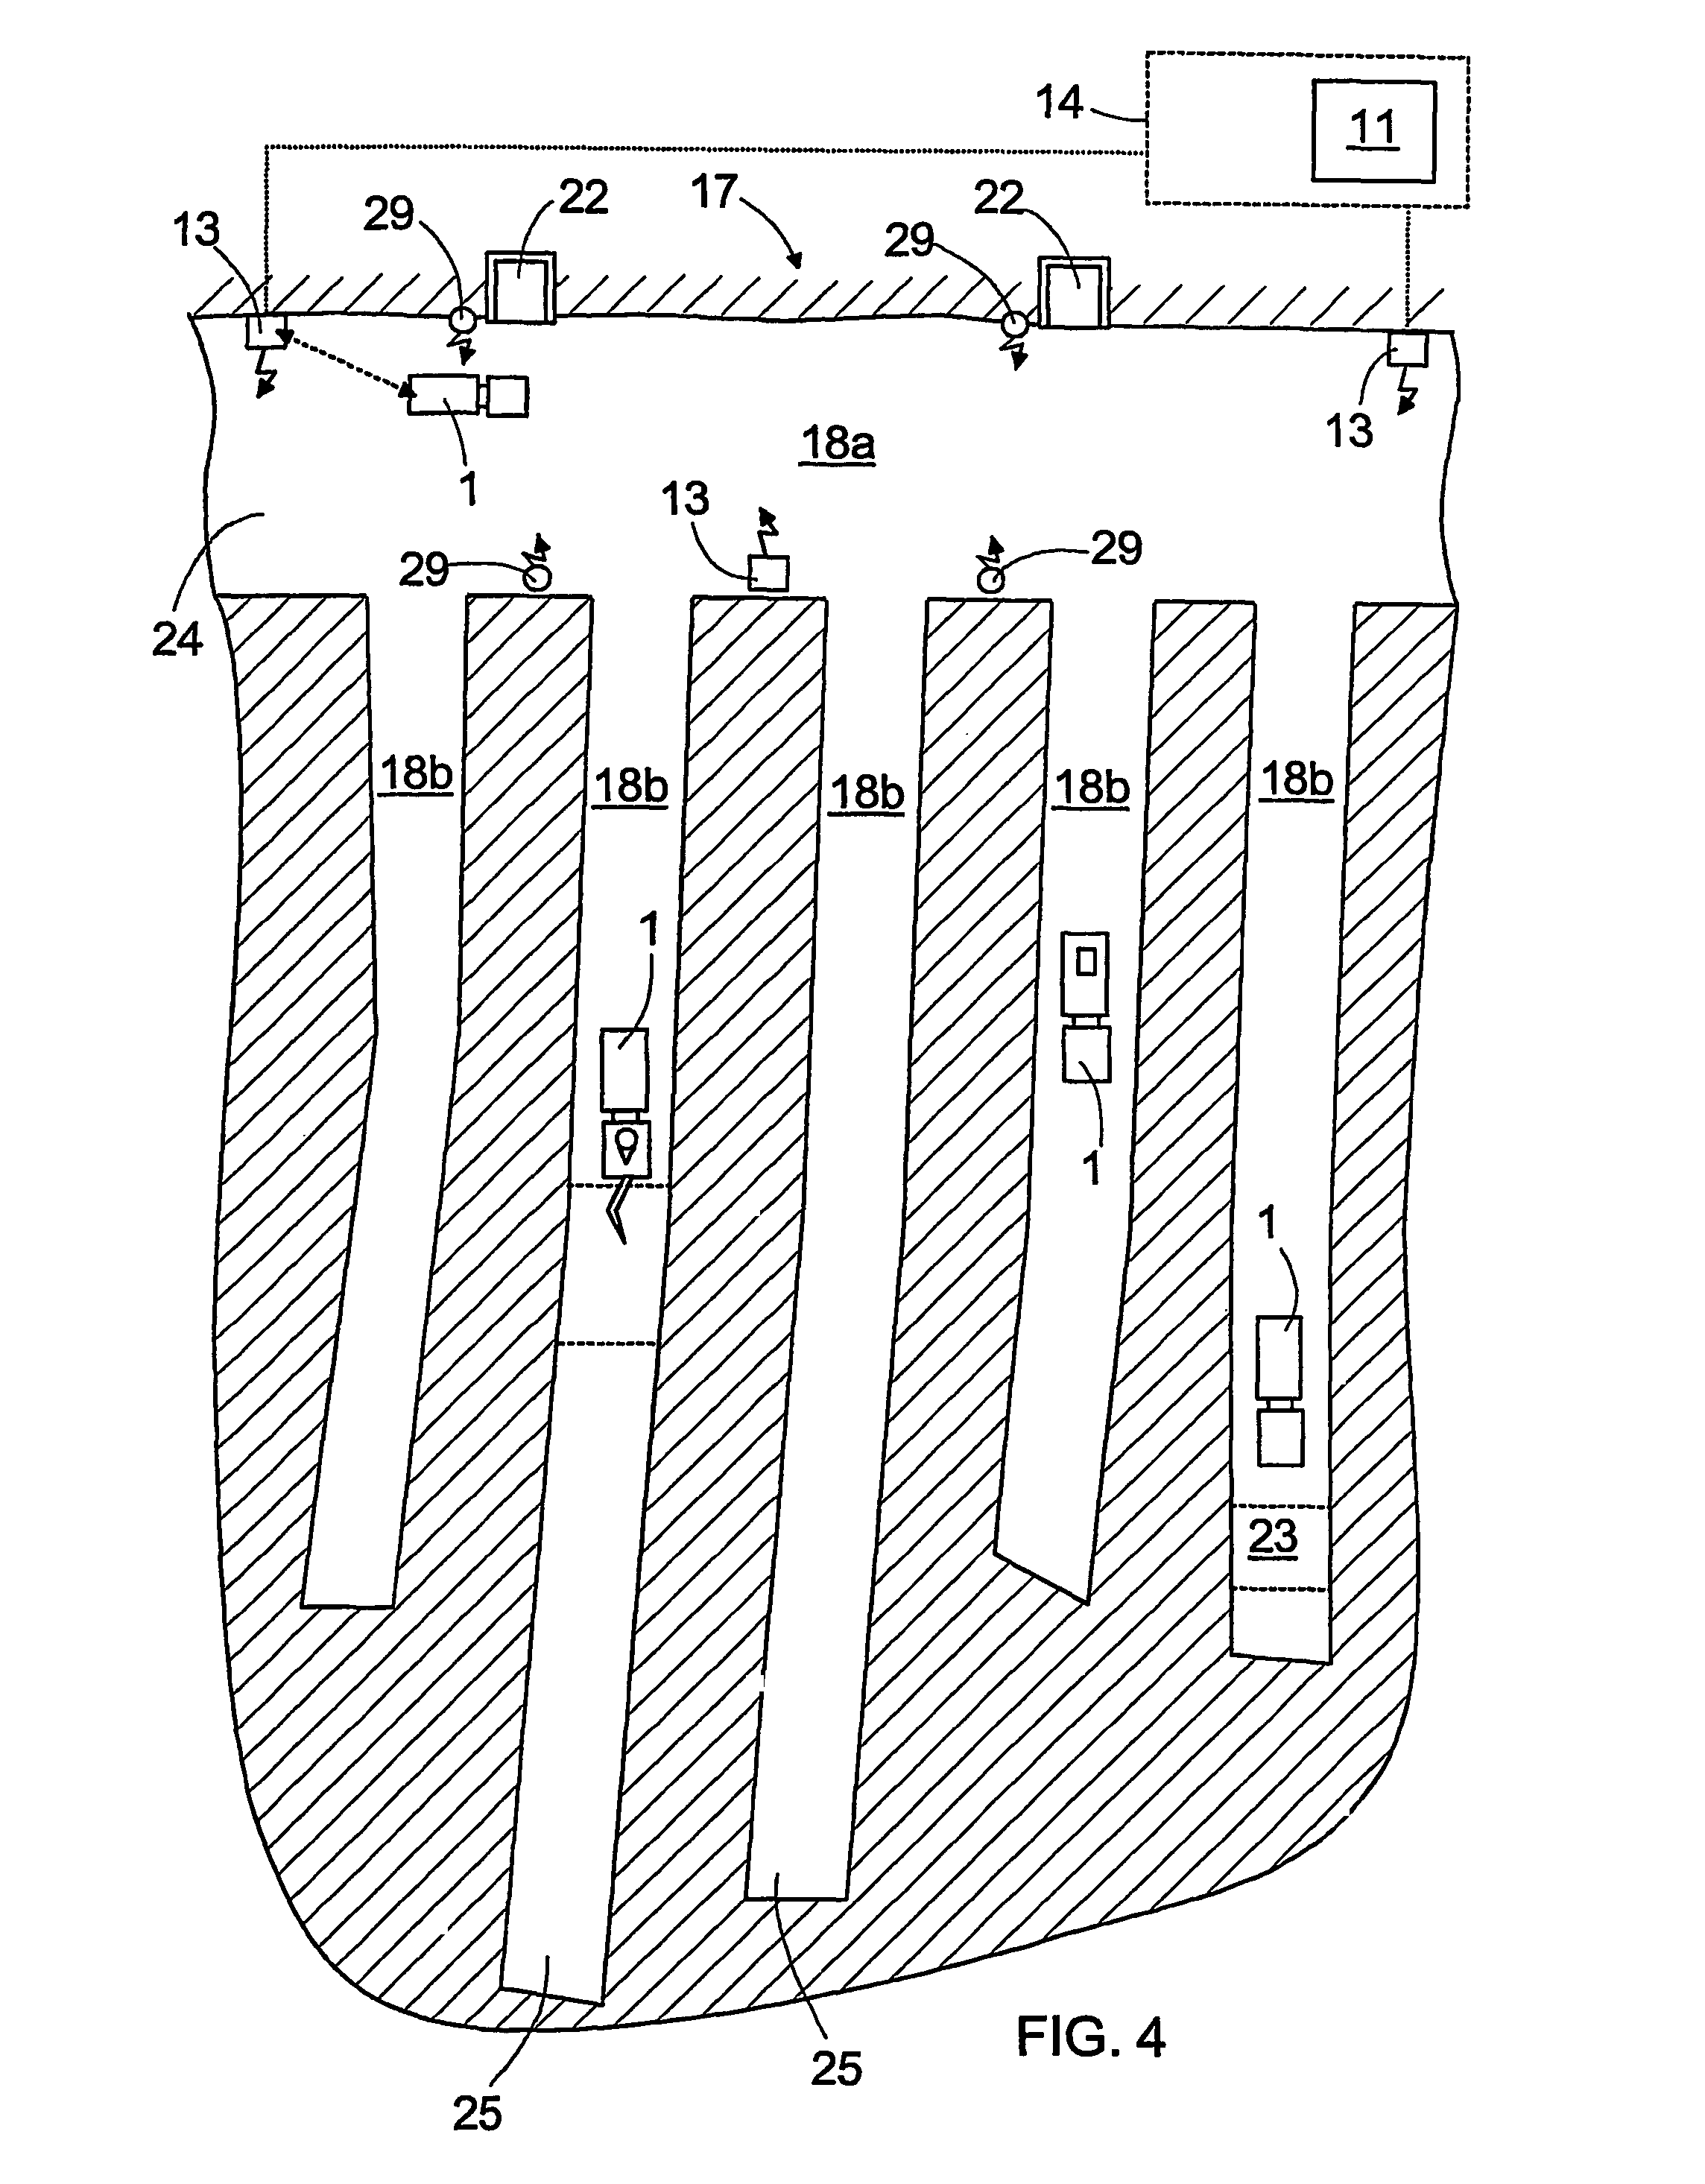 Arrangement for monitoring the location of a mining vehicle in a mine